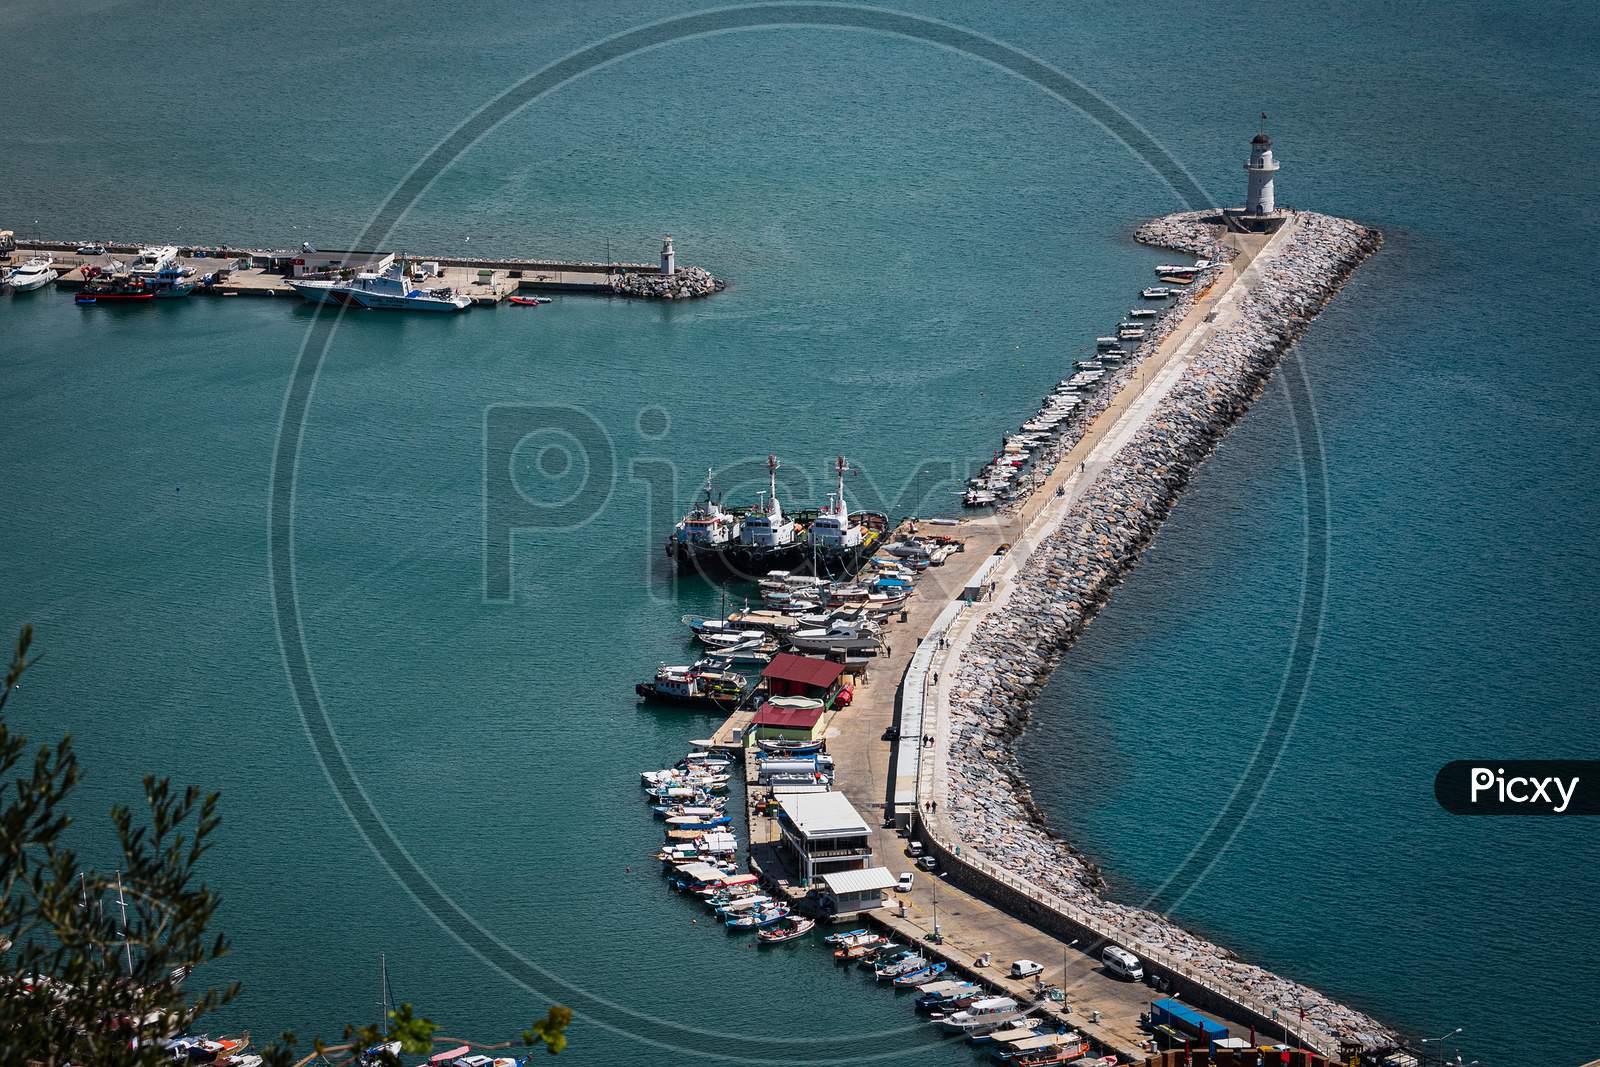 Top View Of A Pier  With A Beautiful White Lighthouse And A Pier With Many Boats And Yachts On The Background Of The Blue Sea